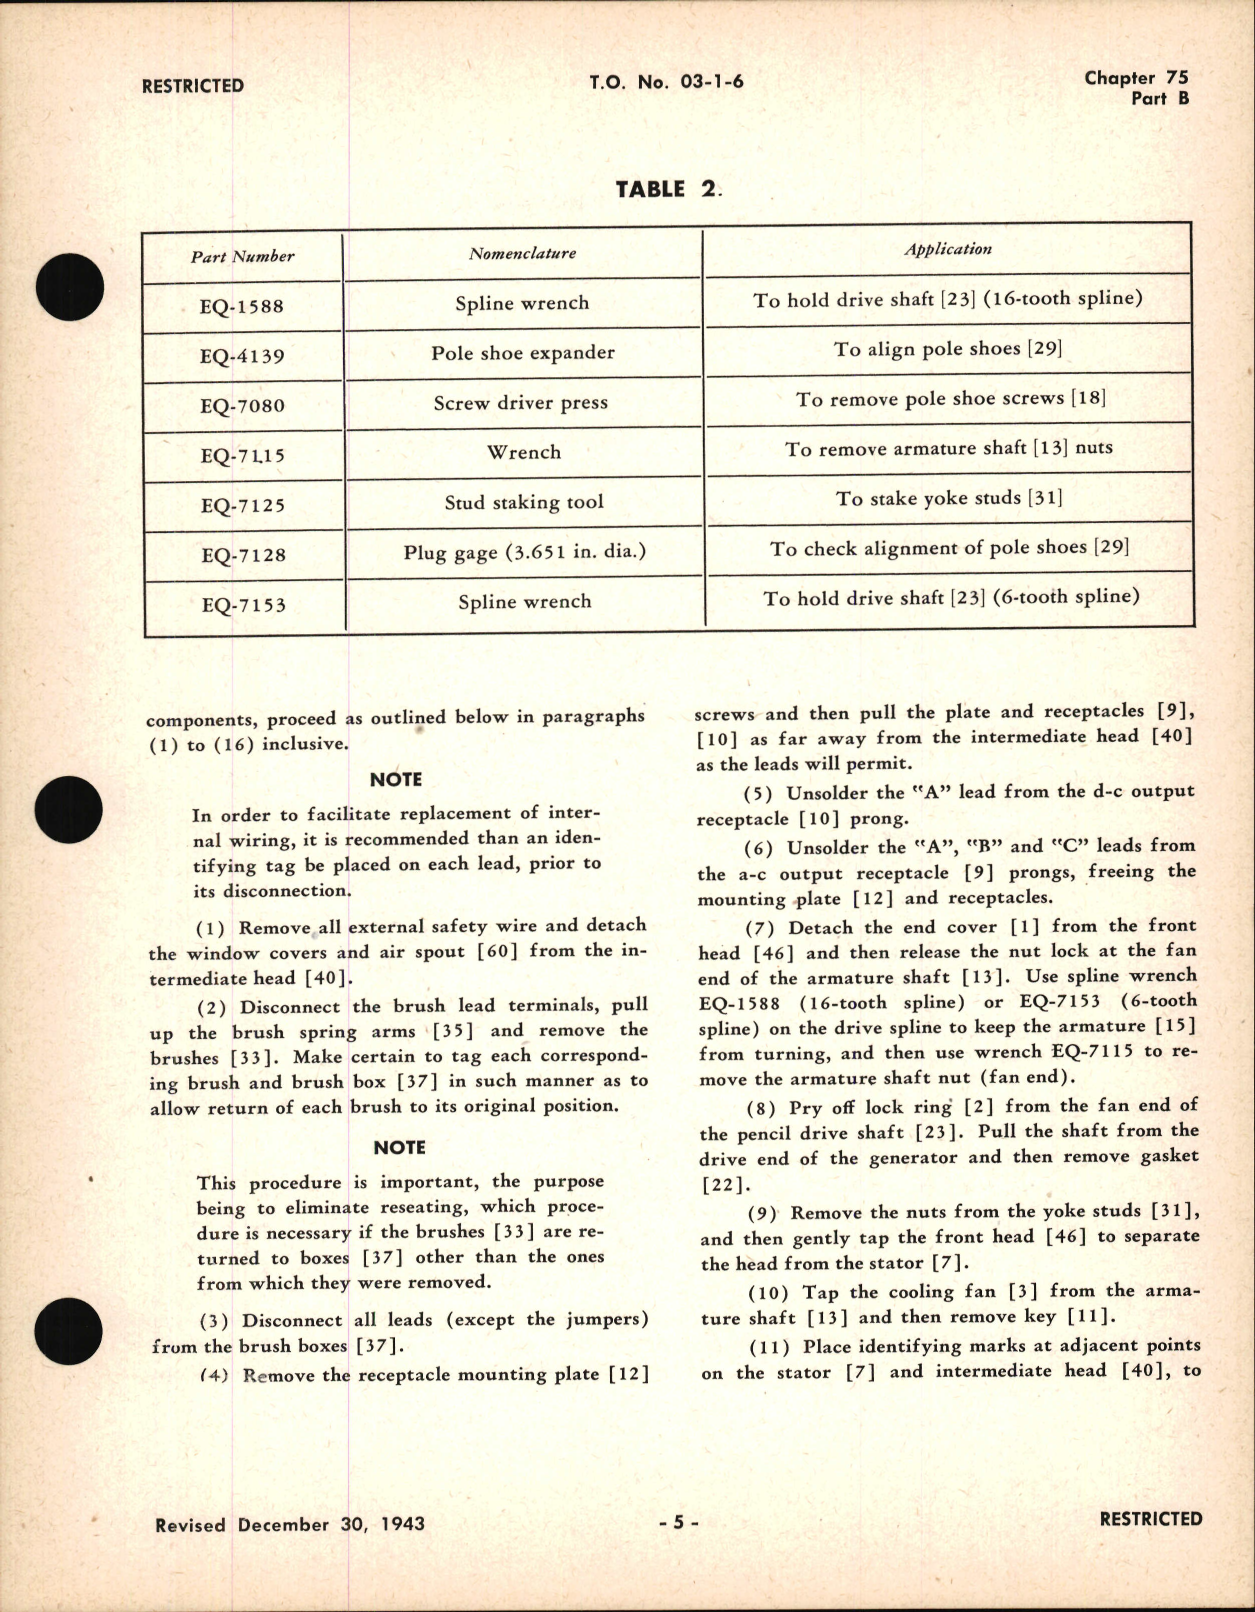 Sample page 5 from AirCorps Library document: Overhaul Instructions for A-C D-C Generator, Type 716, Ch 75 Part B